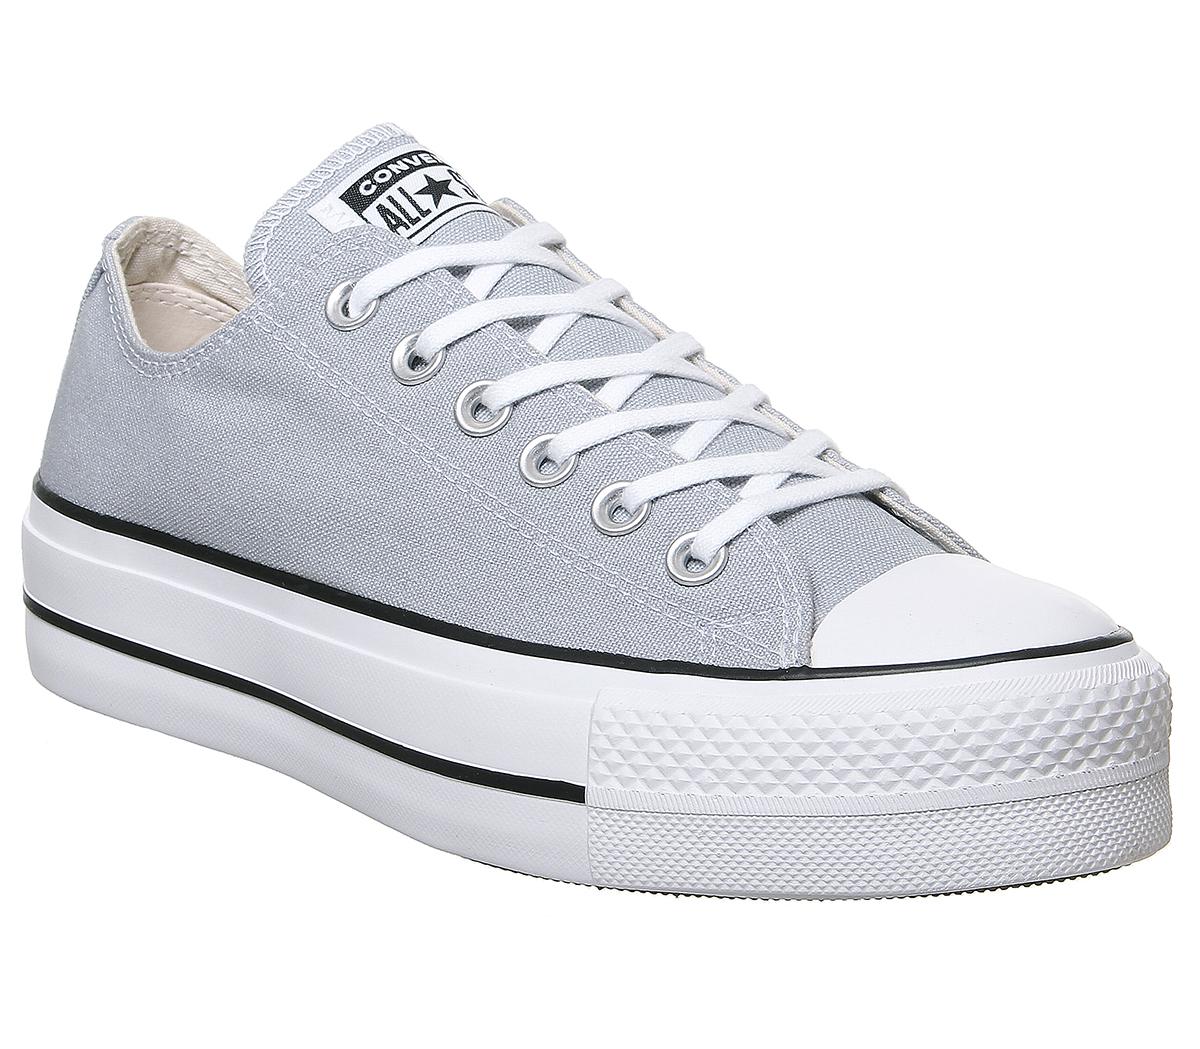 ConverseAll Star Lift Low TrainersWolf Grey White